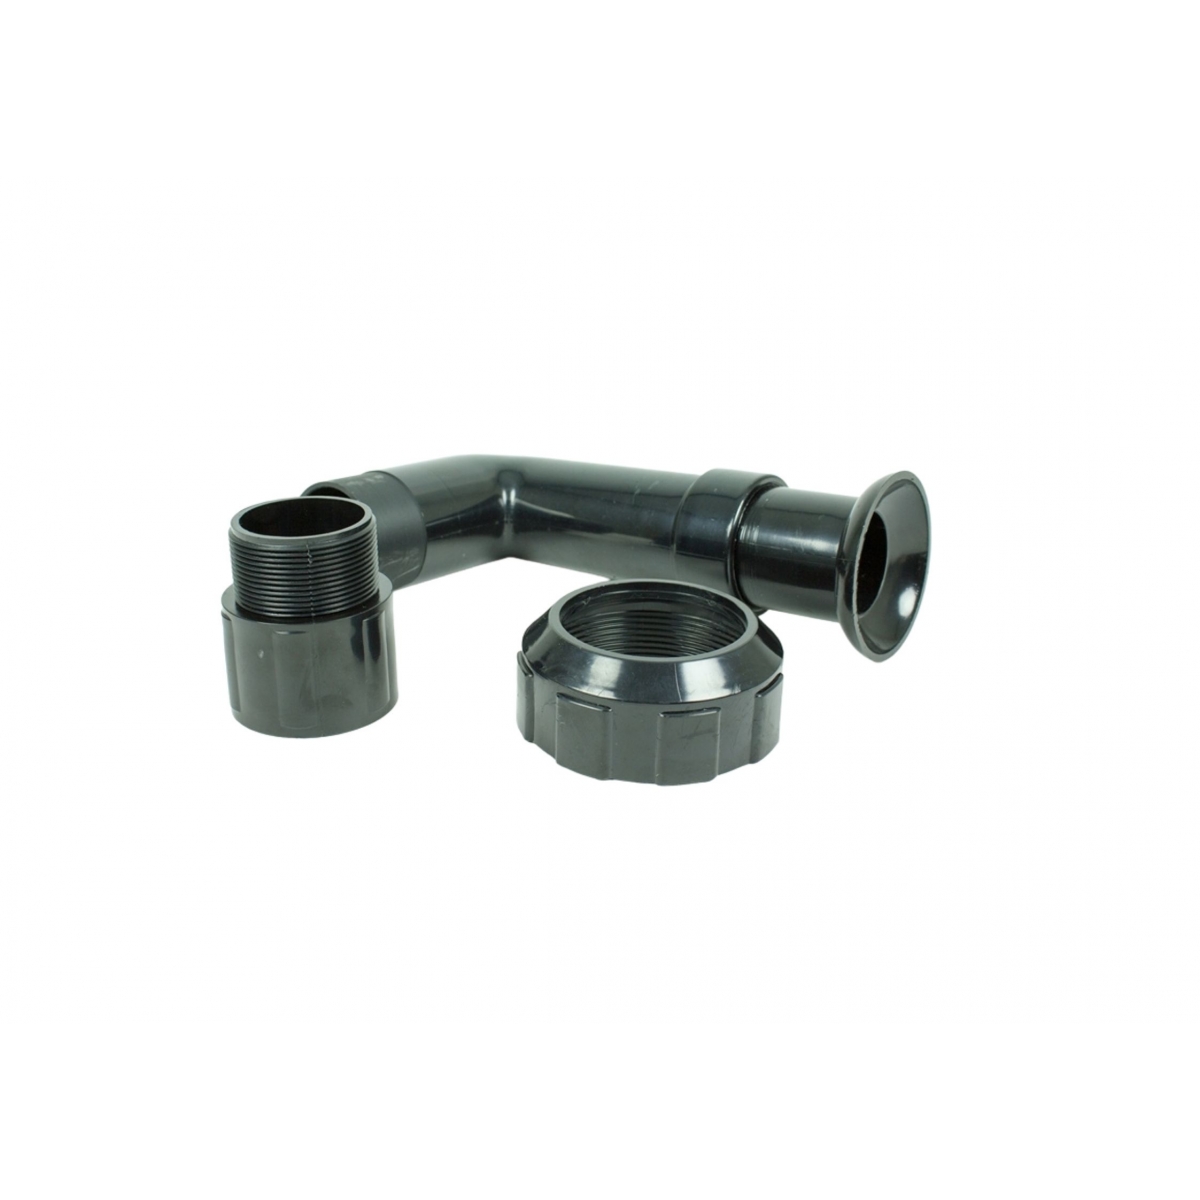 Complete Elbow 1" 1/2 Multiport Valve Coral